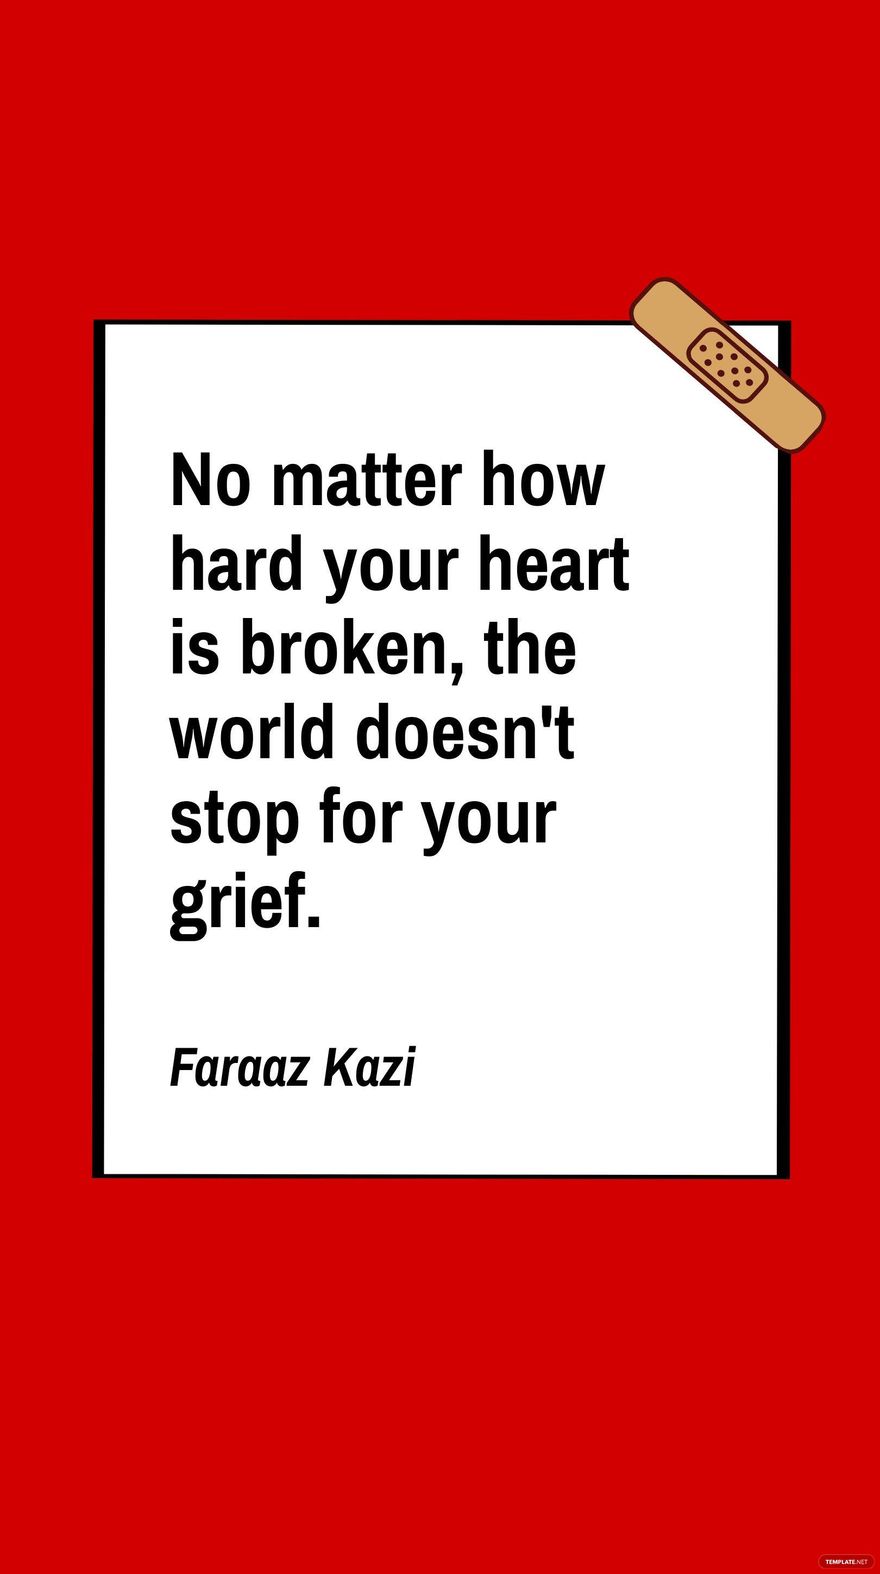 Faraaz Kazi - No matter how hard your heart is broken, the world doesn't stop for your grief.